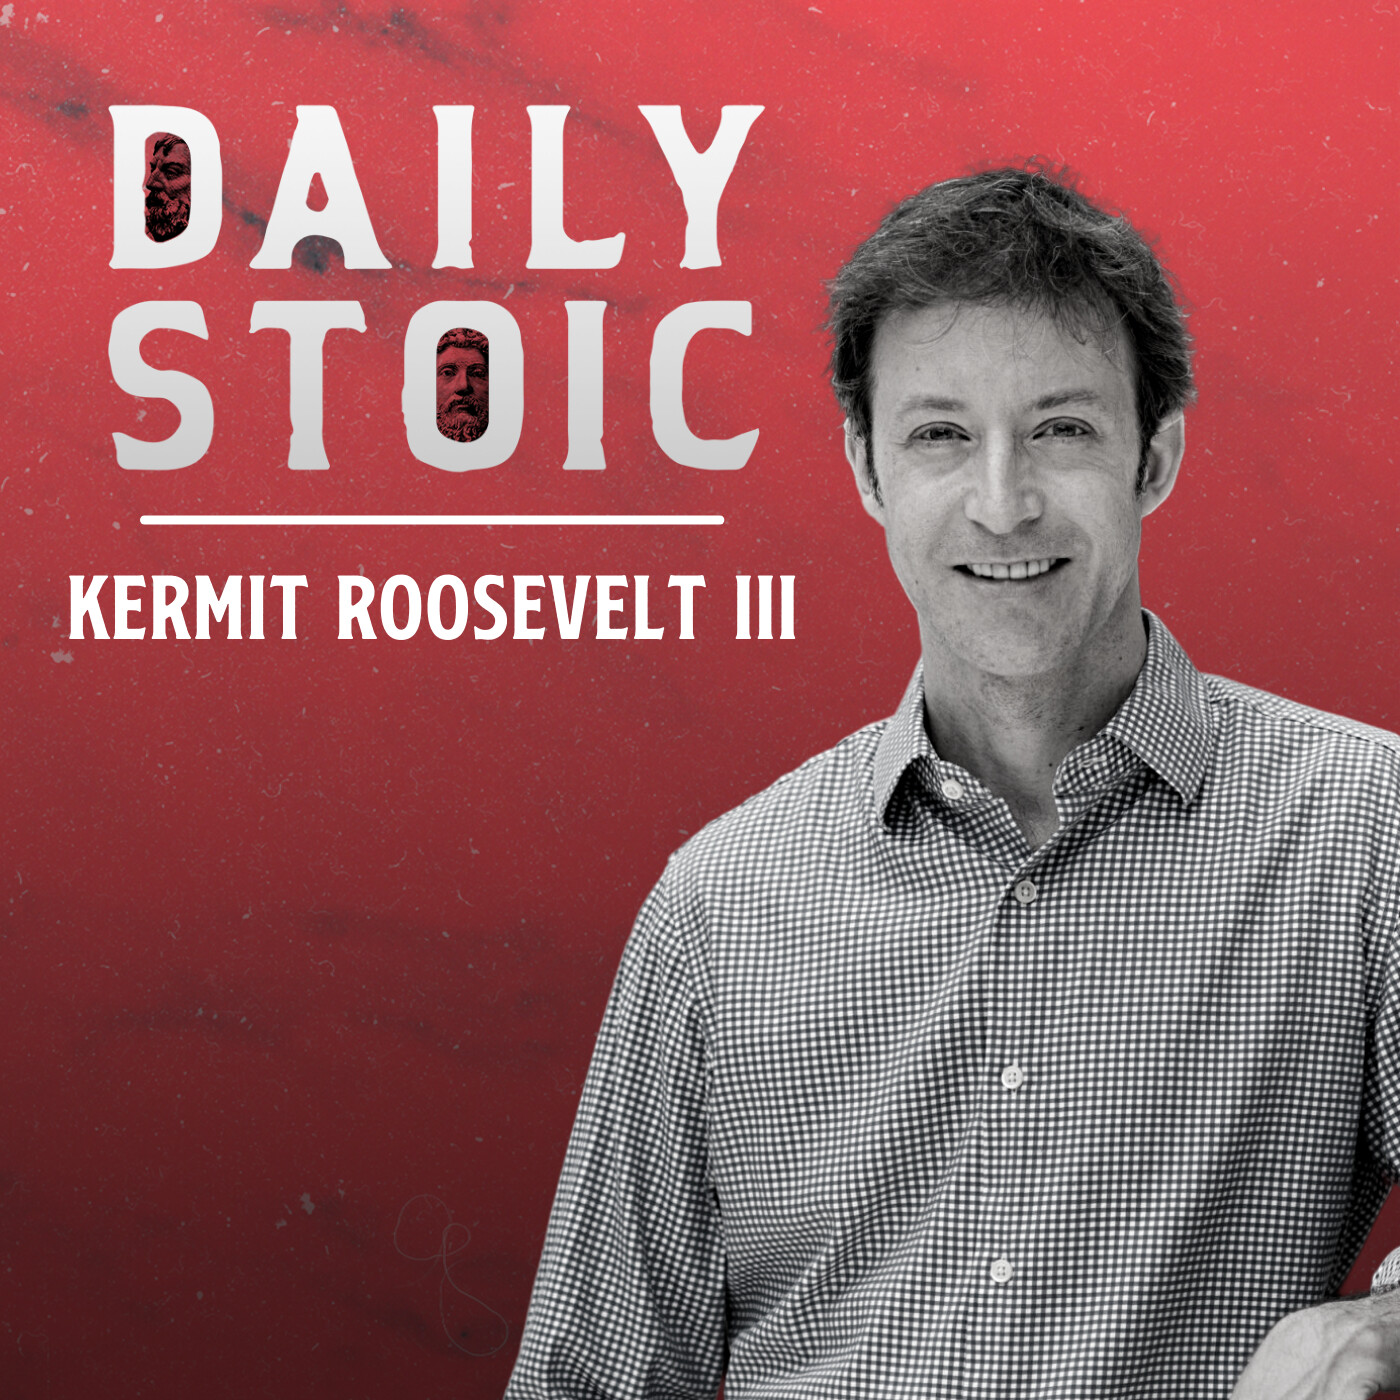 Kermit Roosevelt III on Theodore Roosevelt And Cultural Movements (PT 2)